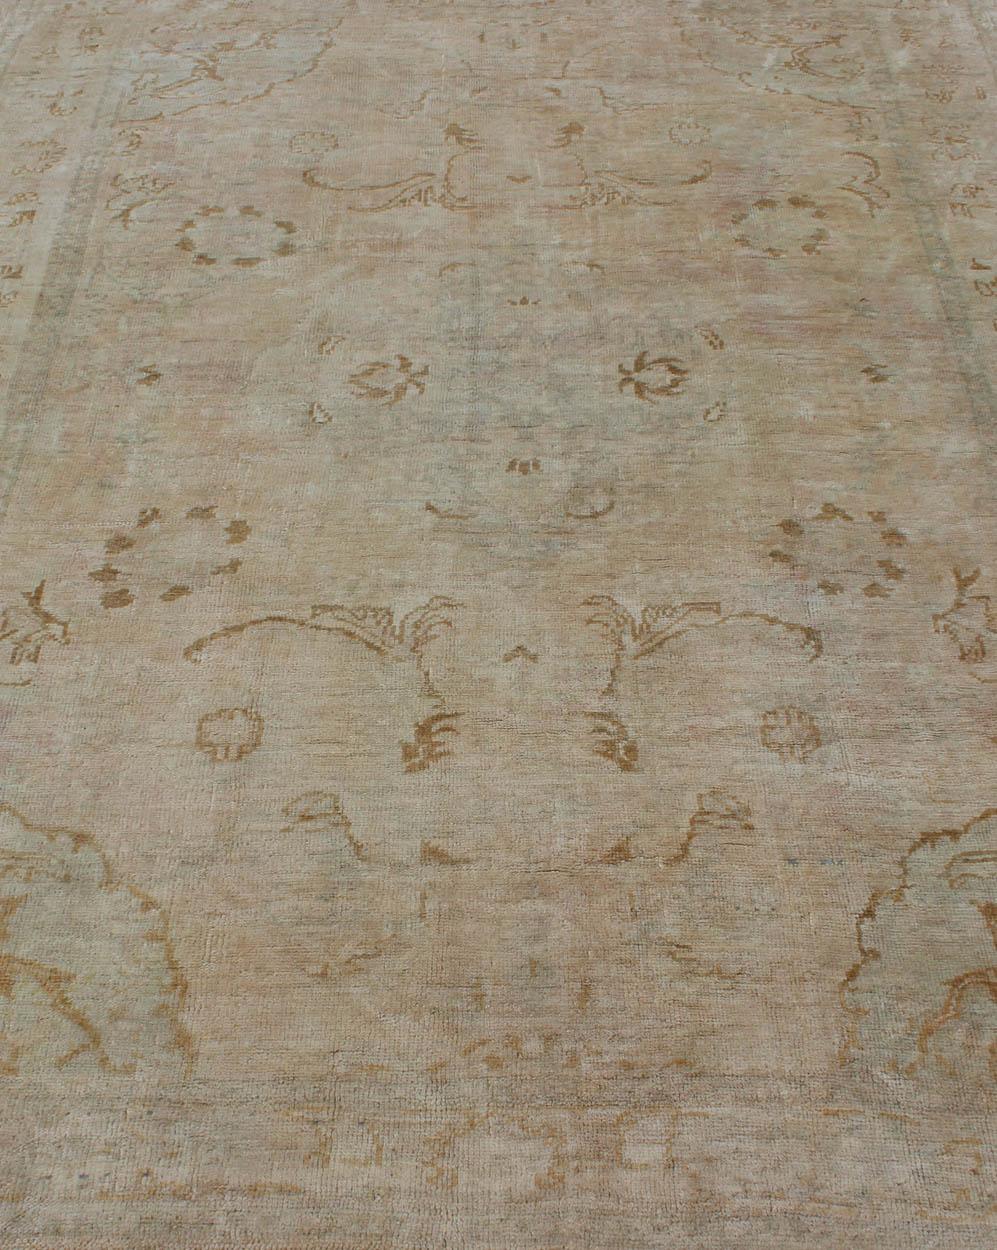 Cream Background Midcentury Vintage Oushak Rug from Turkey with Floral Design For Sale 4